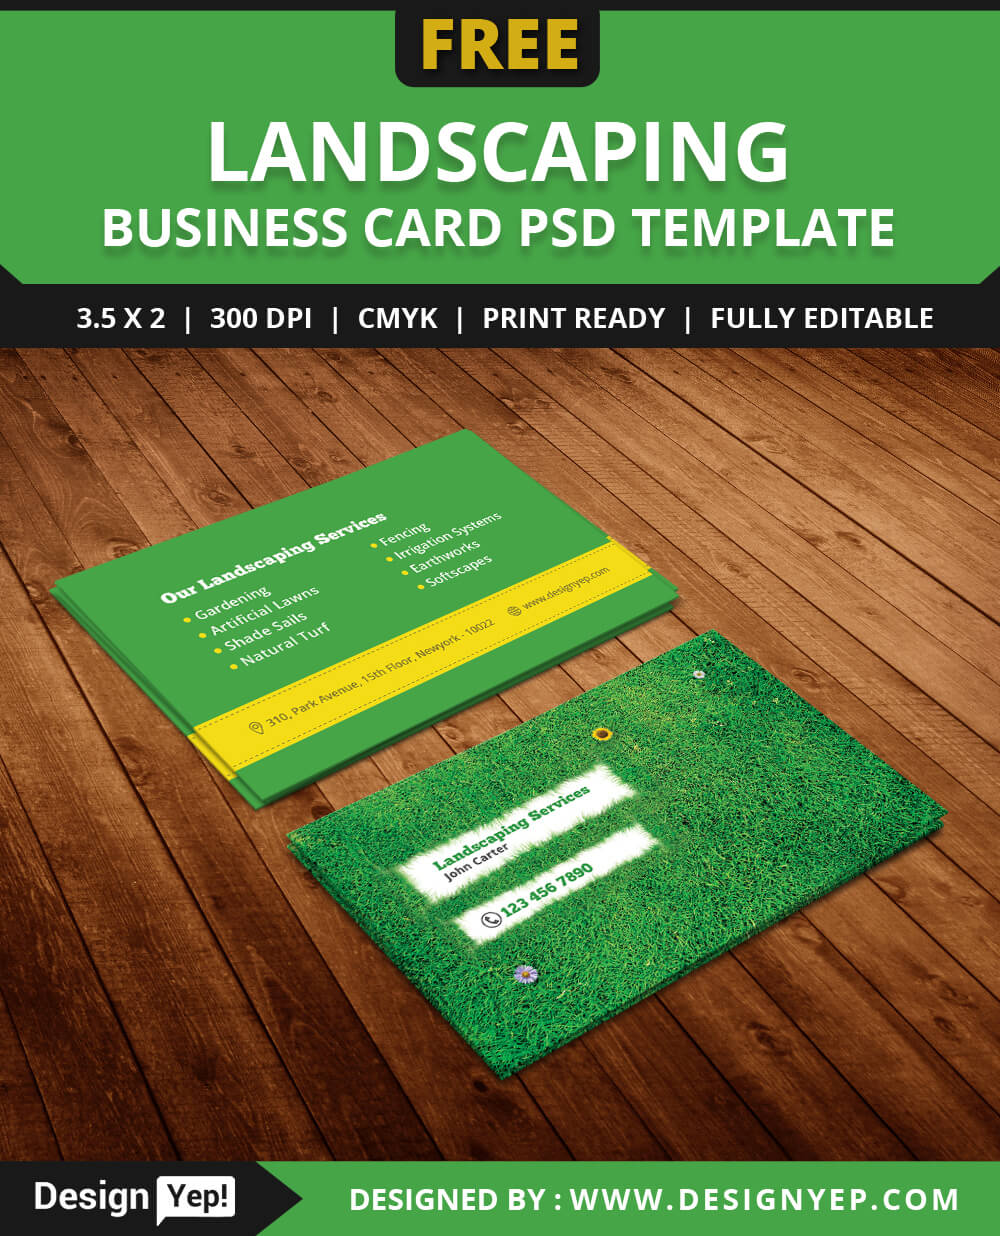 41 Landscaping Business, Free Landscaping Flyer Templates To With Lawn Care Business Cards Templates Free